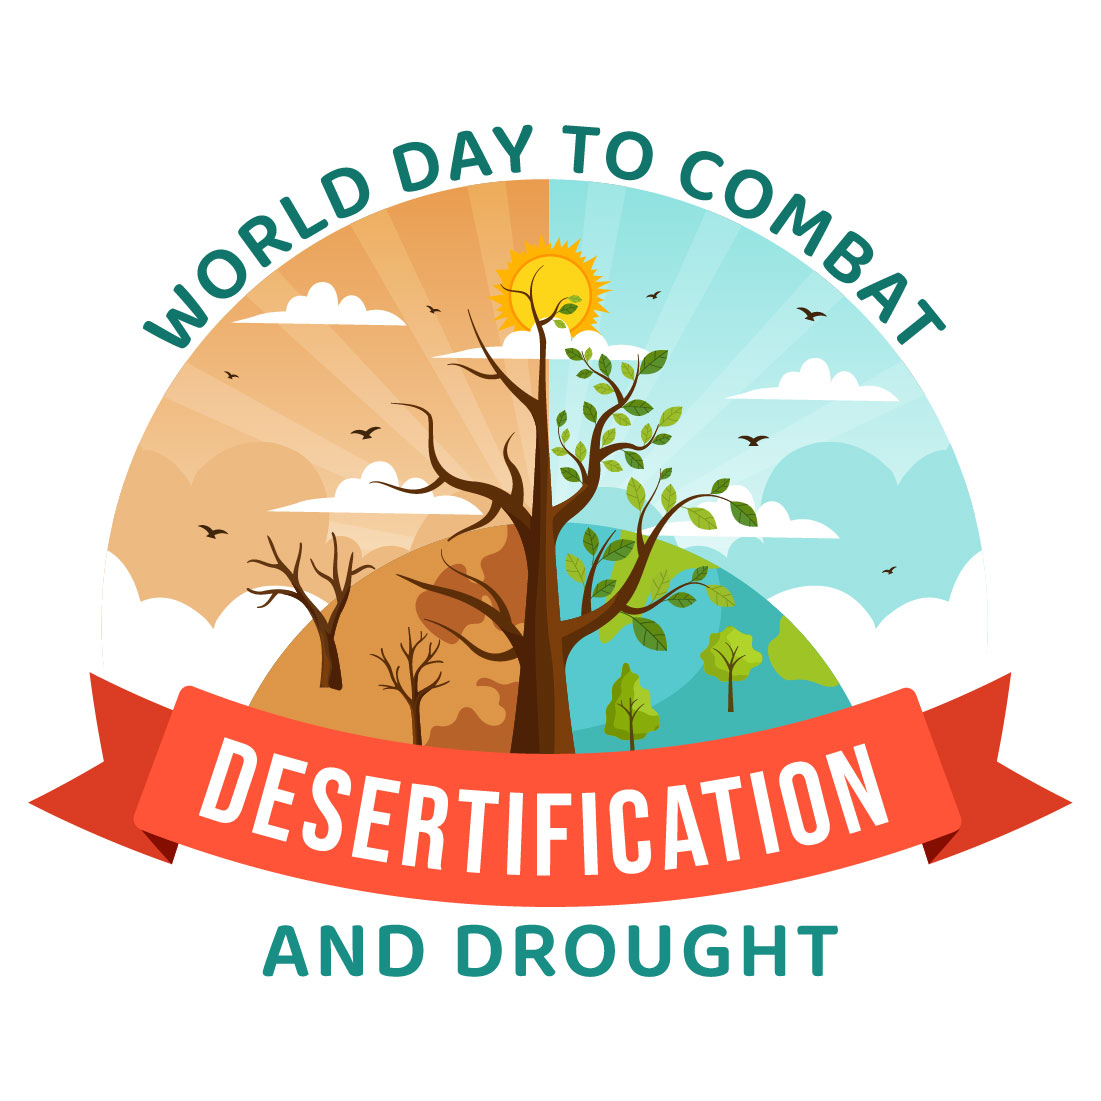 12 Day to Combat Desertification and Drought Illustration cover image.